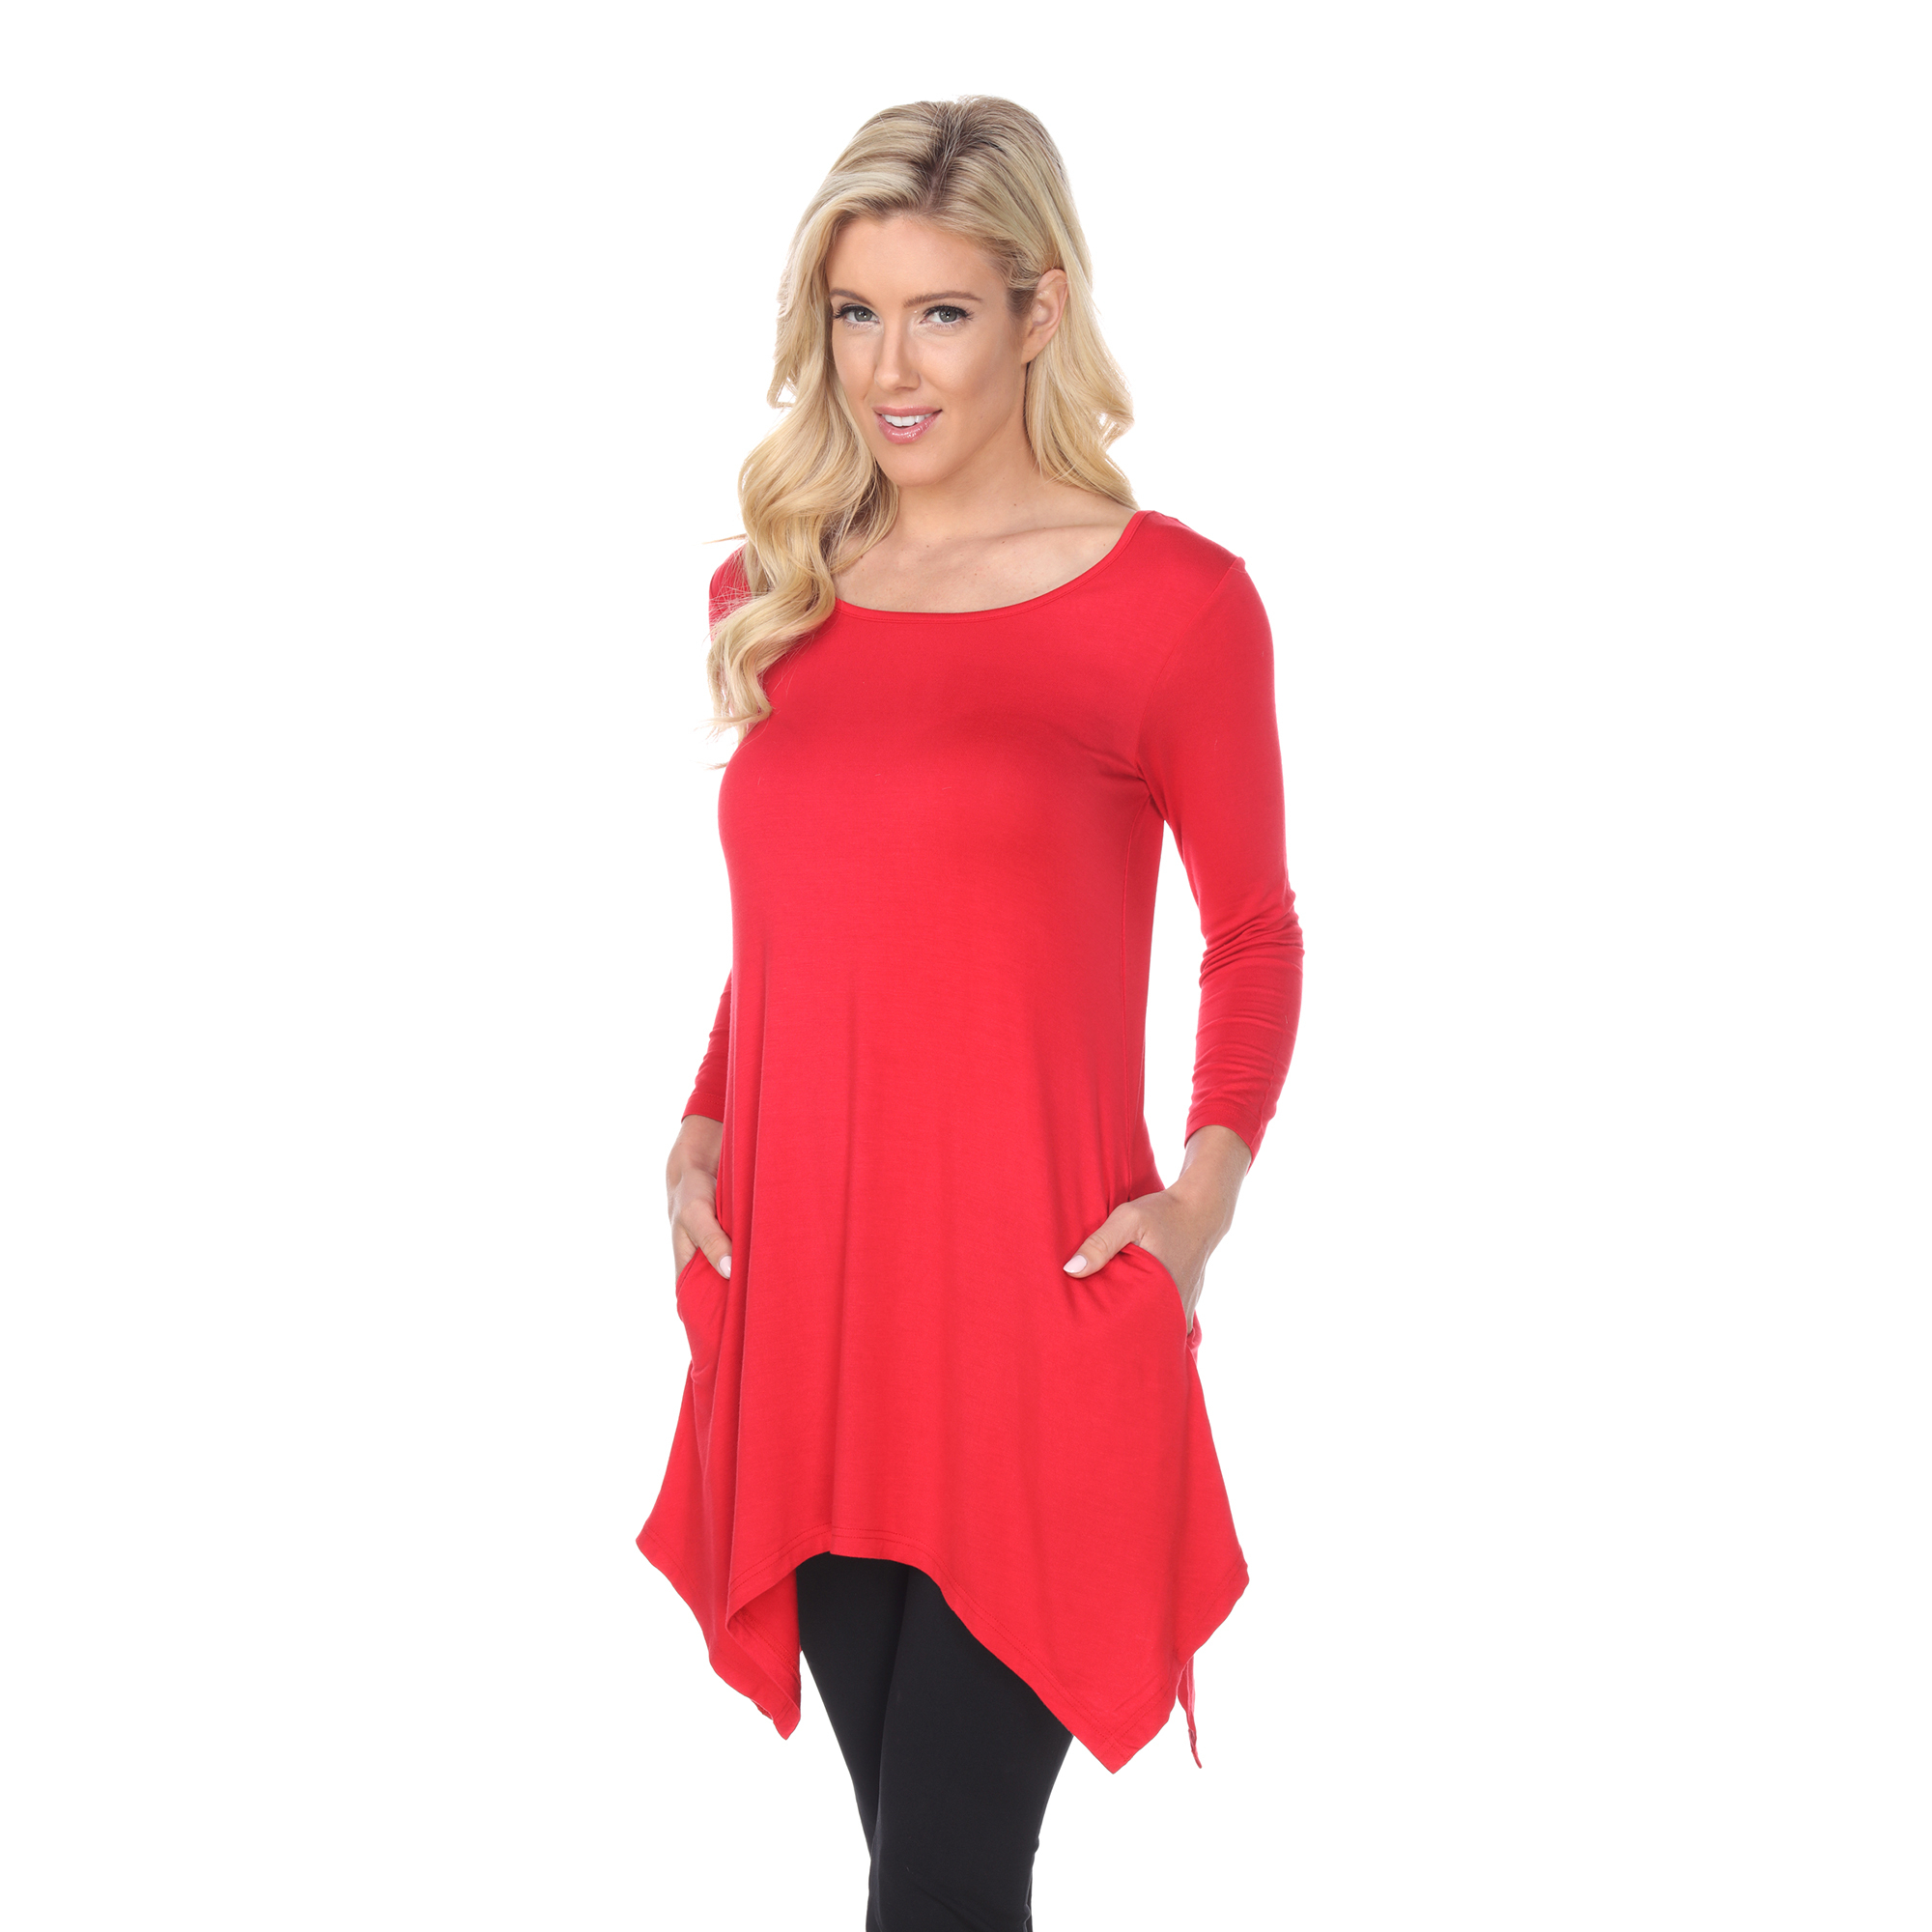 White Mark Women's Quarter Sleeve Tunic Top With Pockets - Red, 6X